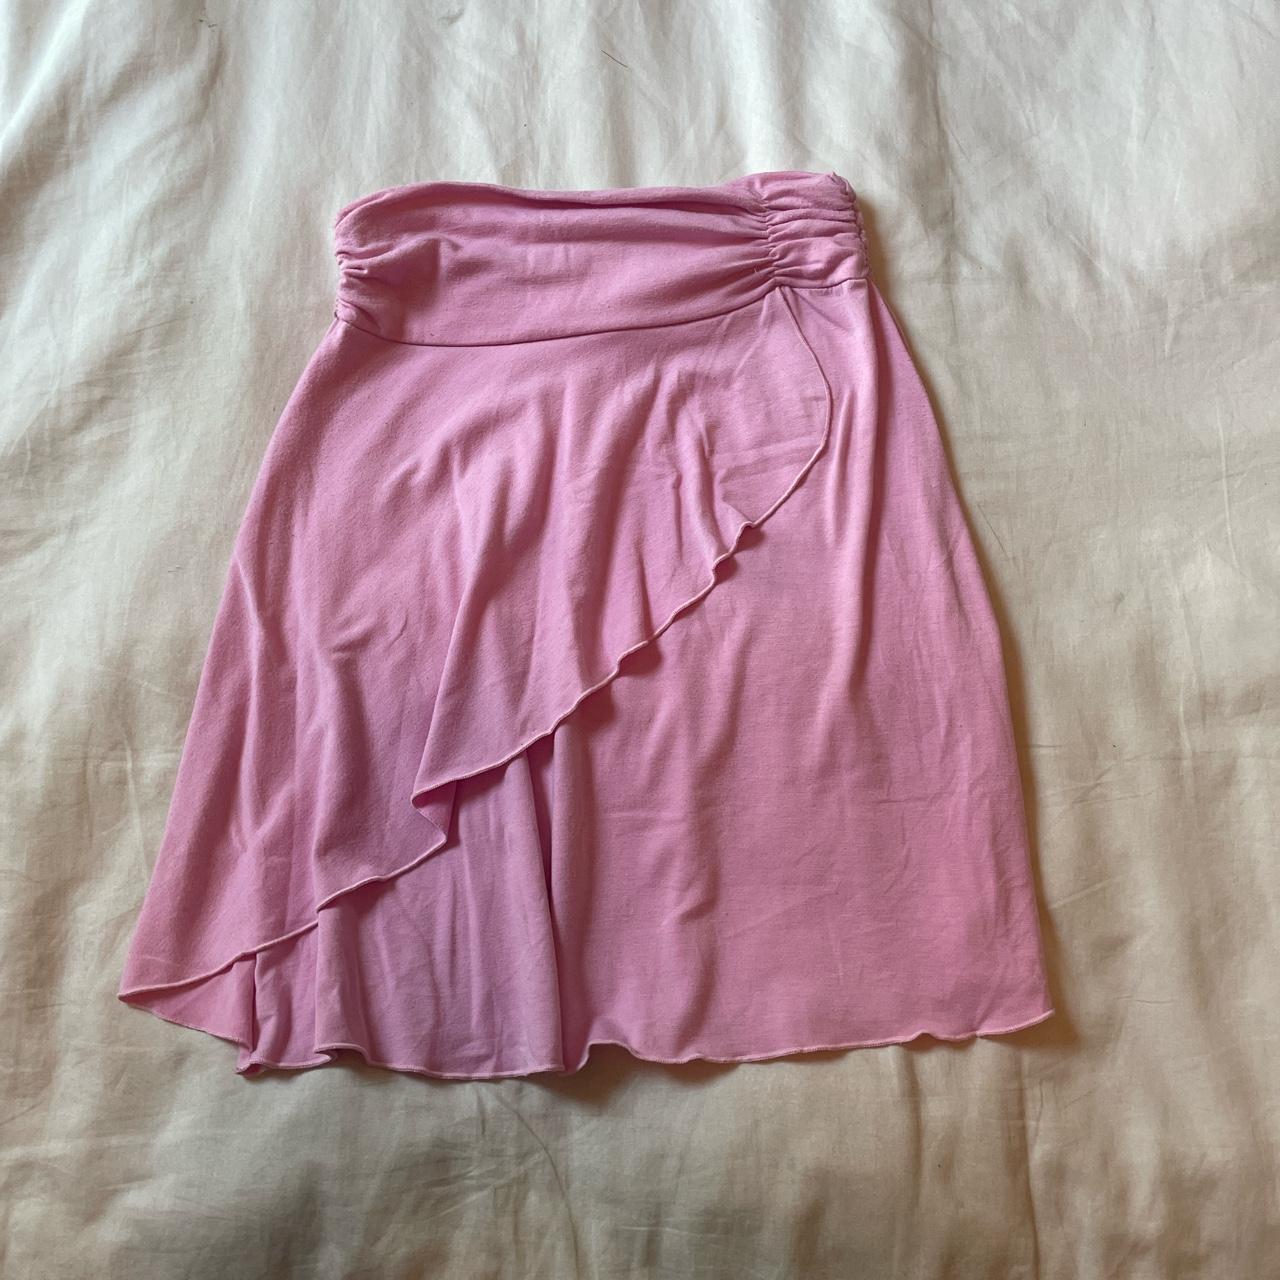 pink y2k low rise skirt mid thigh length -also could... - Depop